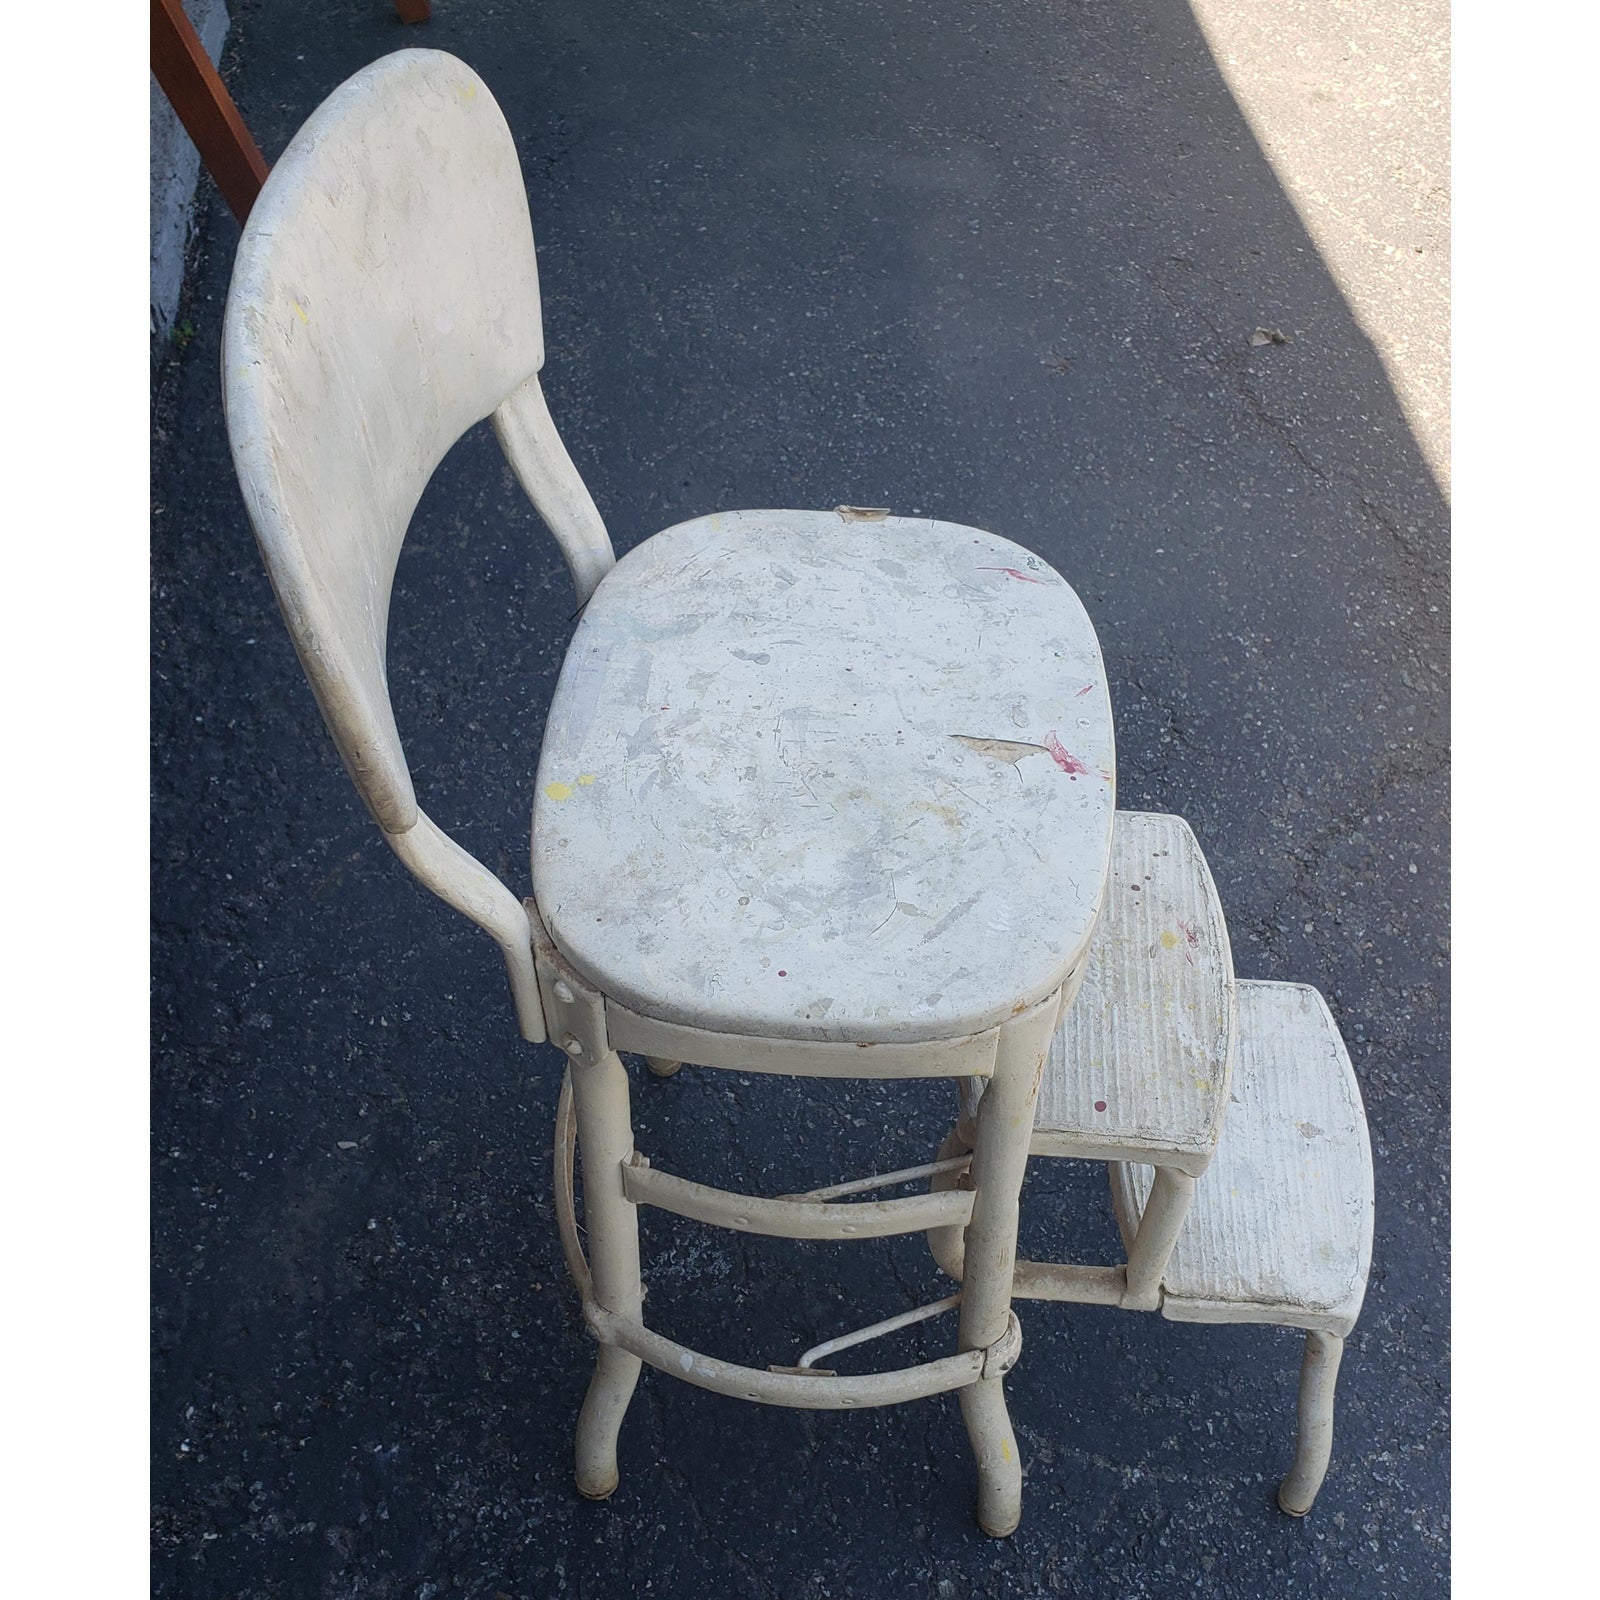 Mid-century antique white Cosco step stool chair. Good condition. The chair steps pull out smoothly as it should and back into place. They need to be cleaned with some steel wool if desired. Antique white vinyl seat and back have some tear and need